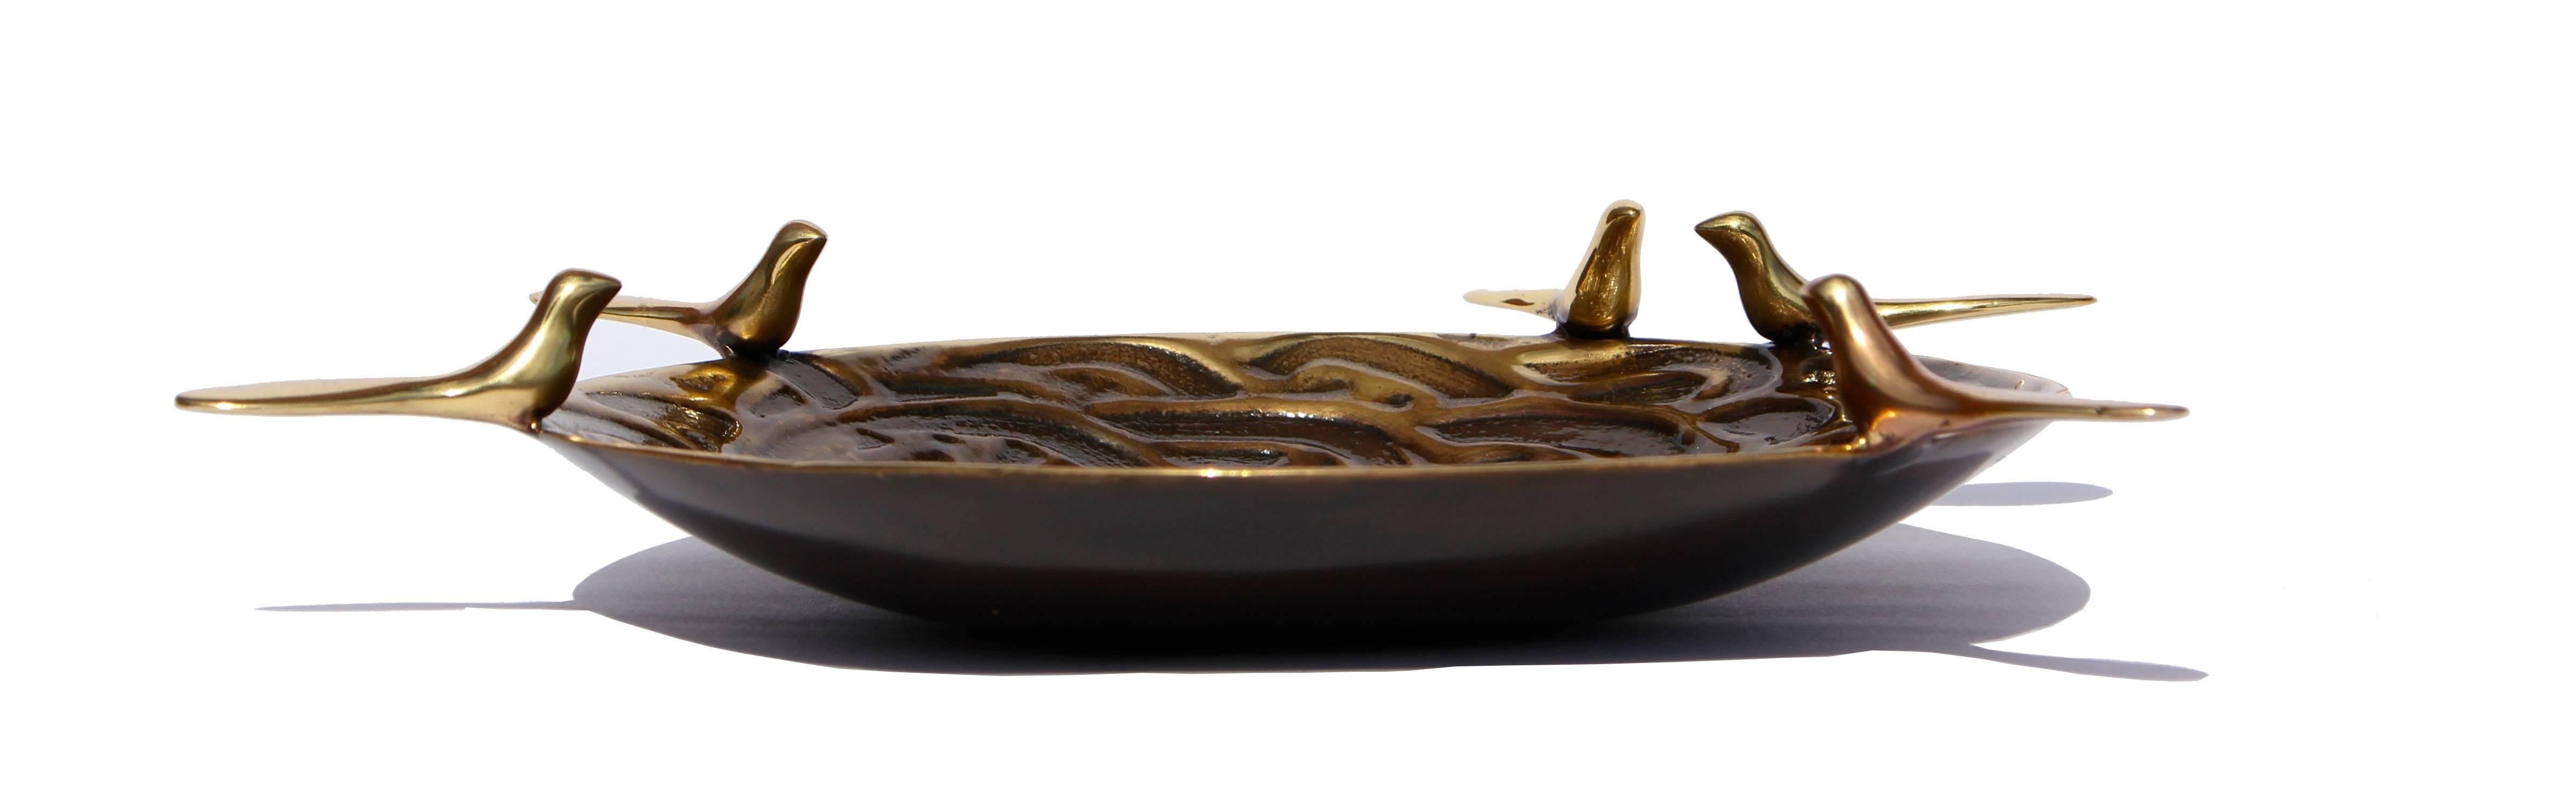 Handmade cast brass dish candle holder with five birds in a bronze patina finish.

Each of those original and elegant dishes are handmade individually. Cast using very traditional techniques, the noble material is aged creating a beautiful